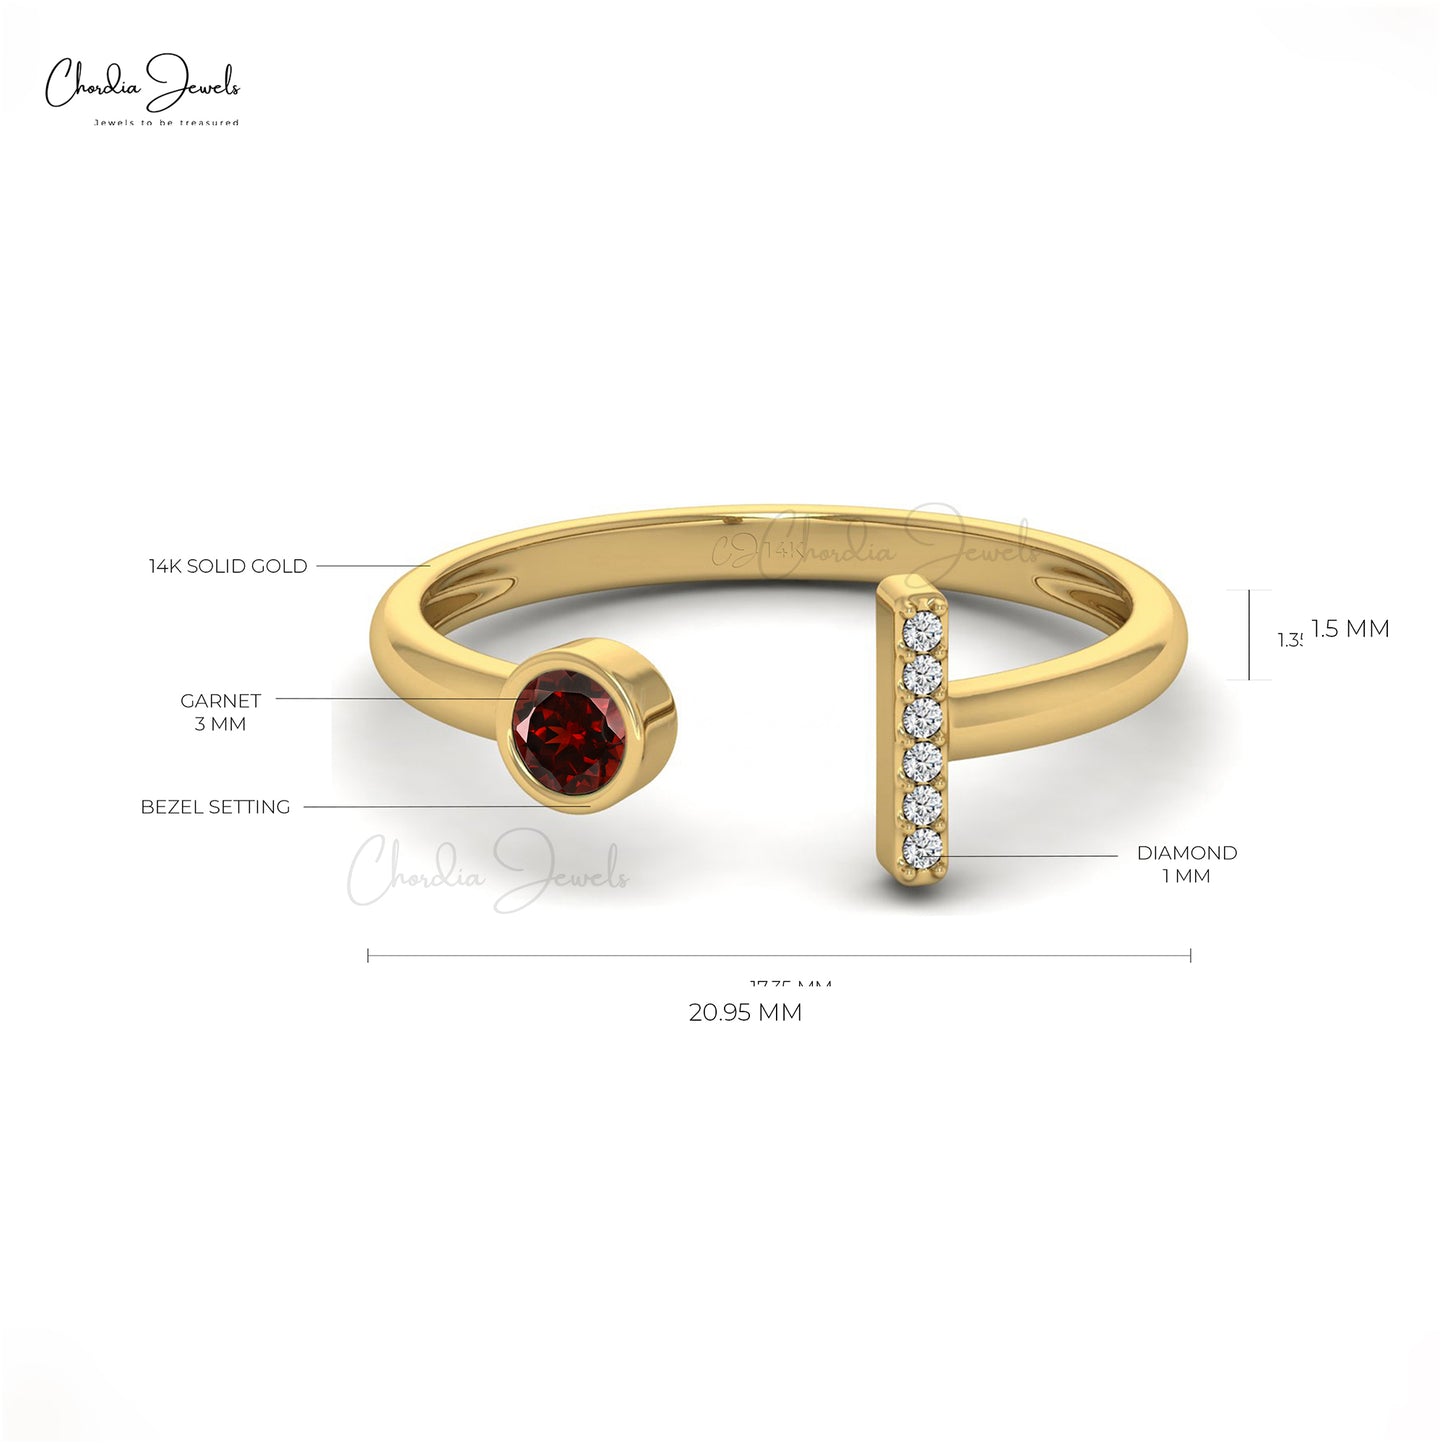 January Birthstone Natural Garnet Engagement Ring 14k Solid Gold Diamond Ring 3mm Round Cut Gemstone Ring For Women's